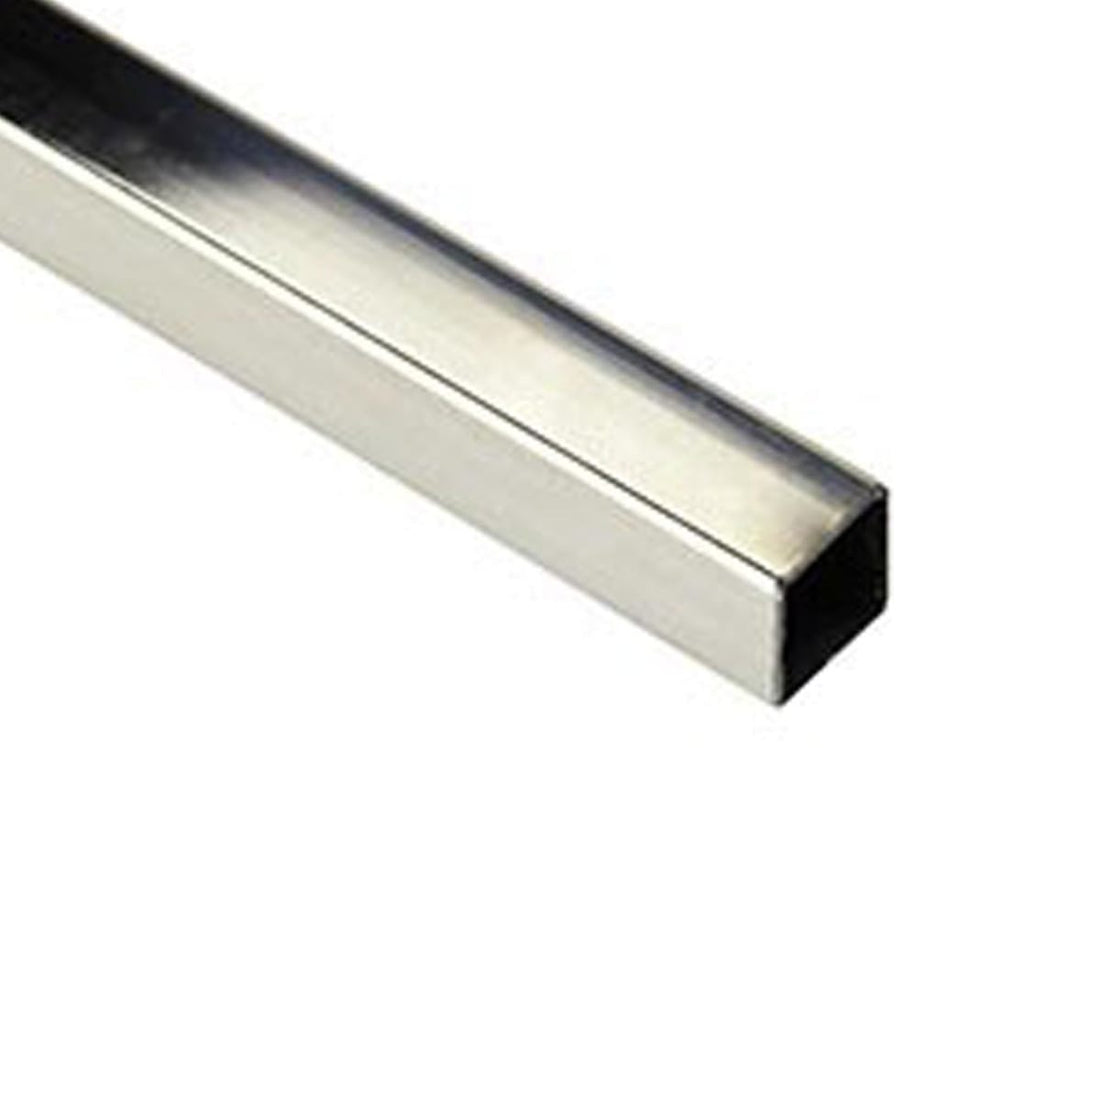 SQUARE TUBE PROFILE 15X15X0.5MM STAINLESS STEEL AISI 304